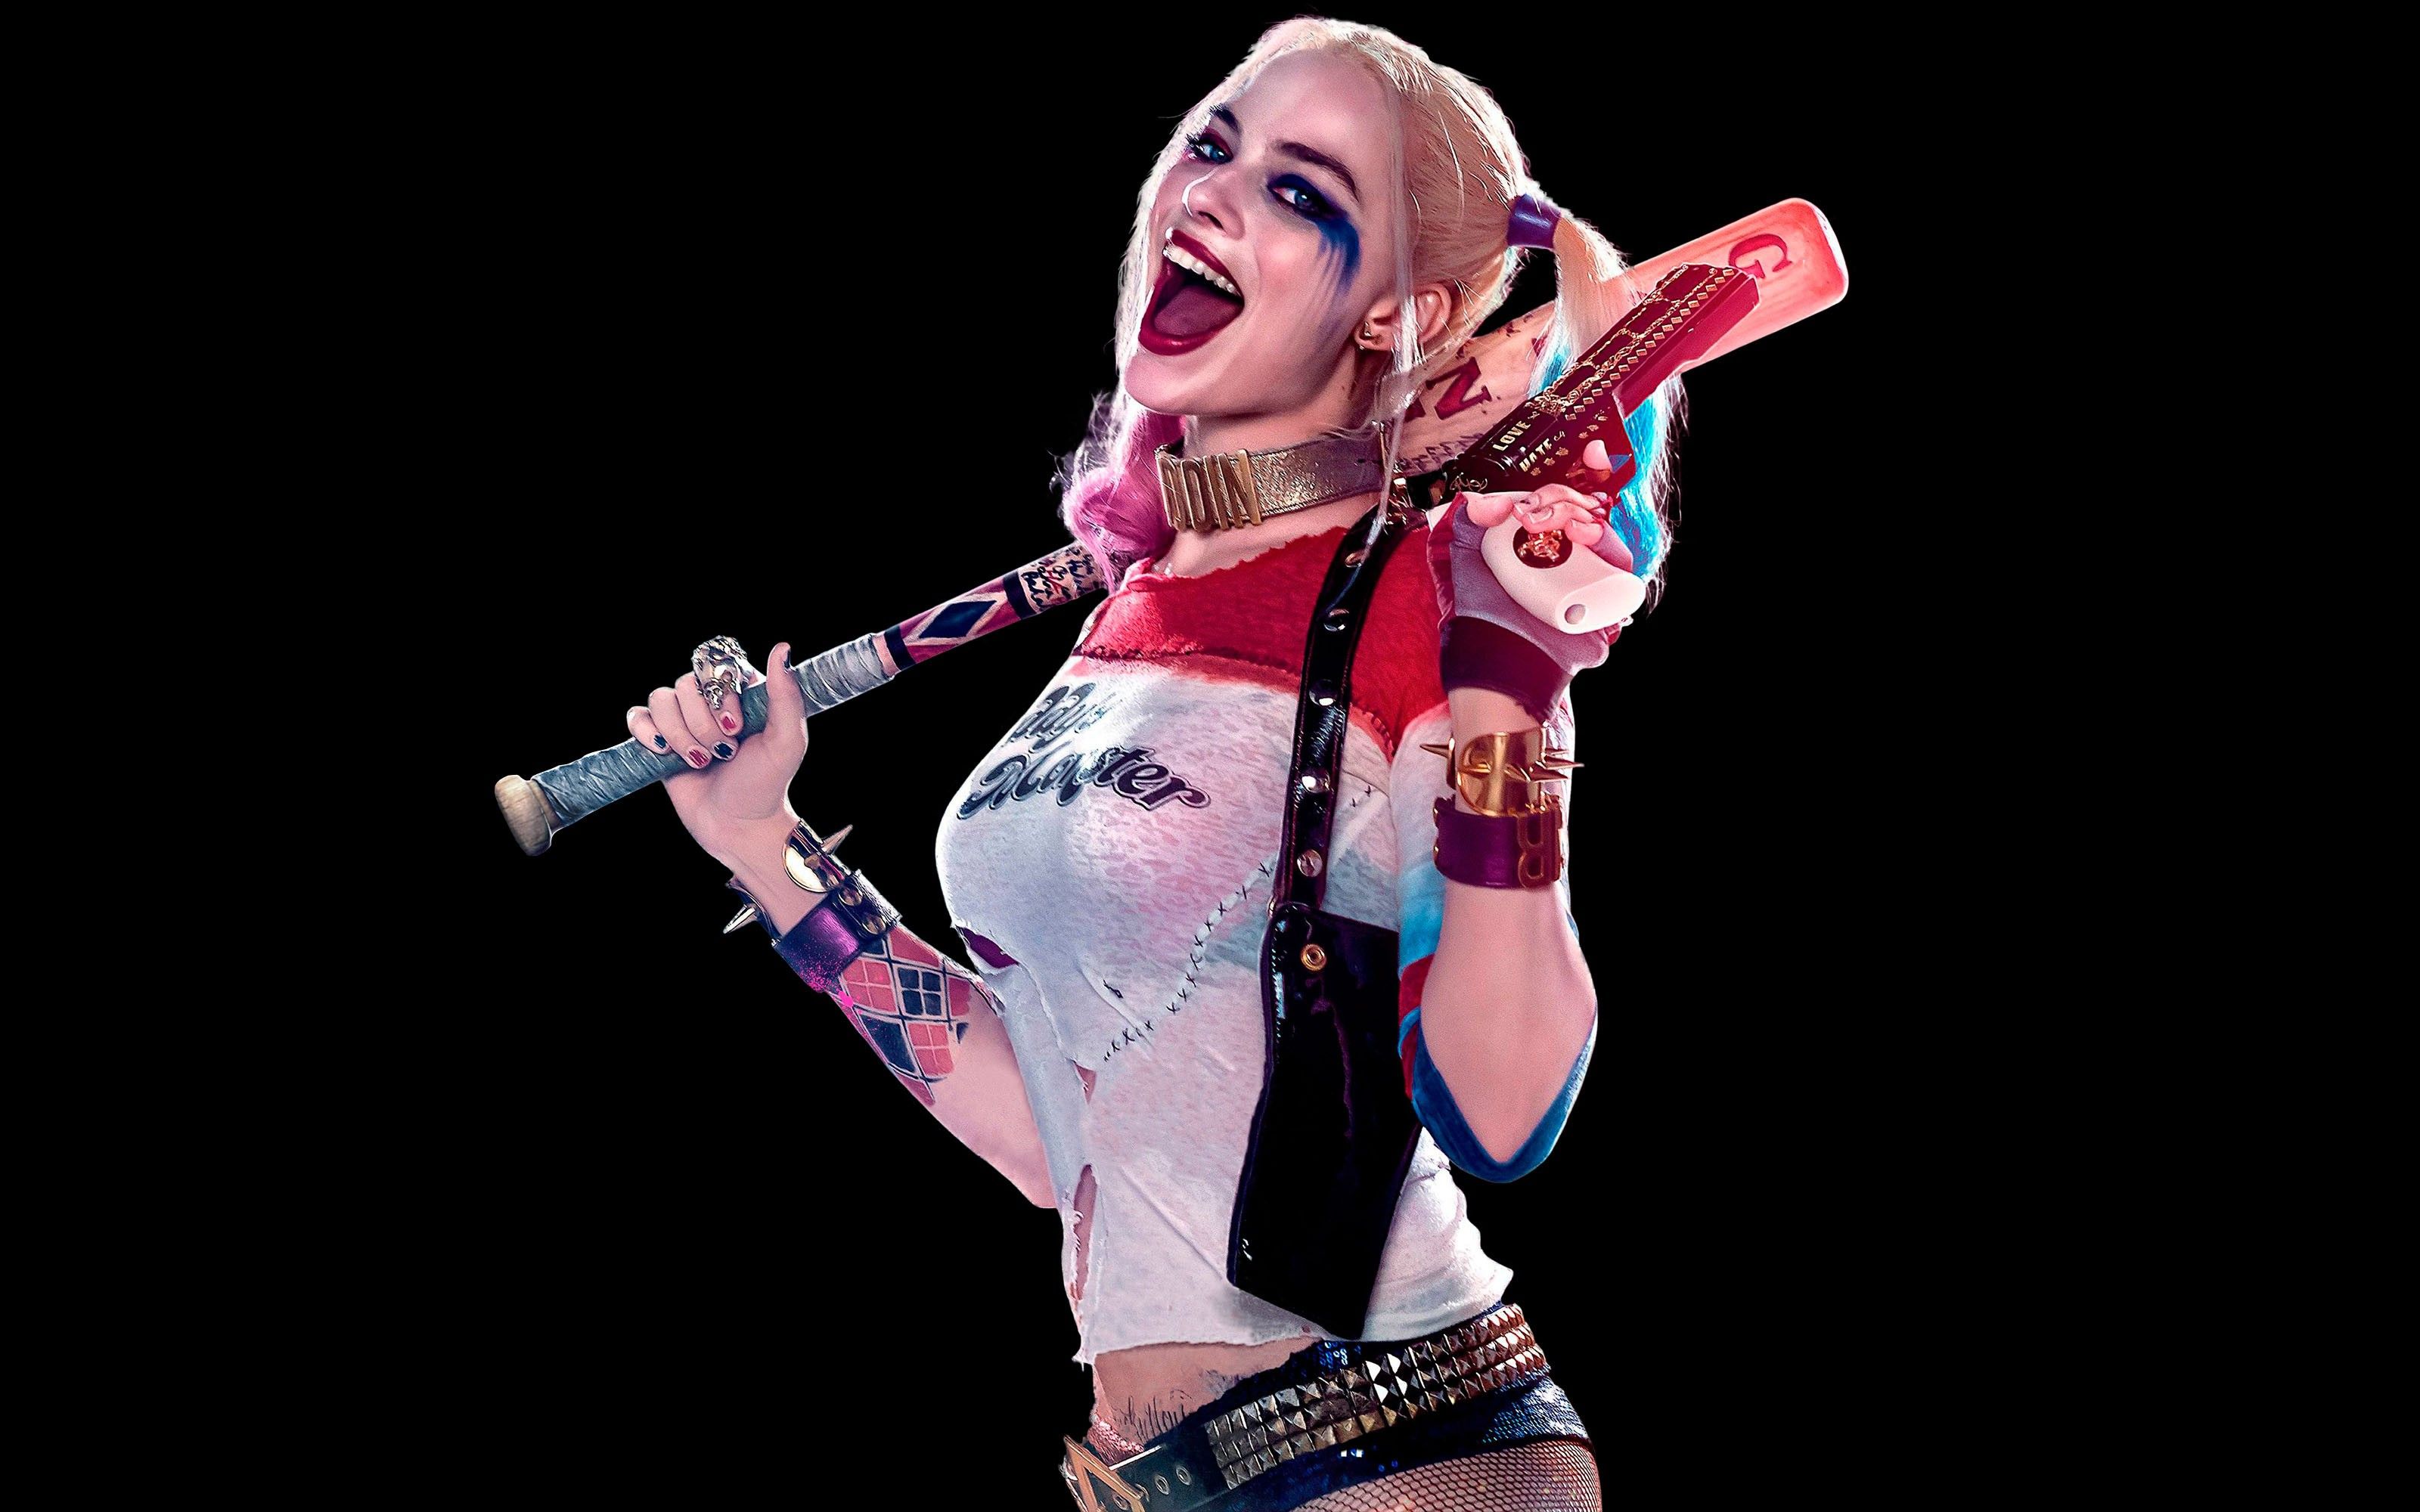 Suicide Squad Harley Quinn iPhone Wallpapers on WallpaperDog